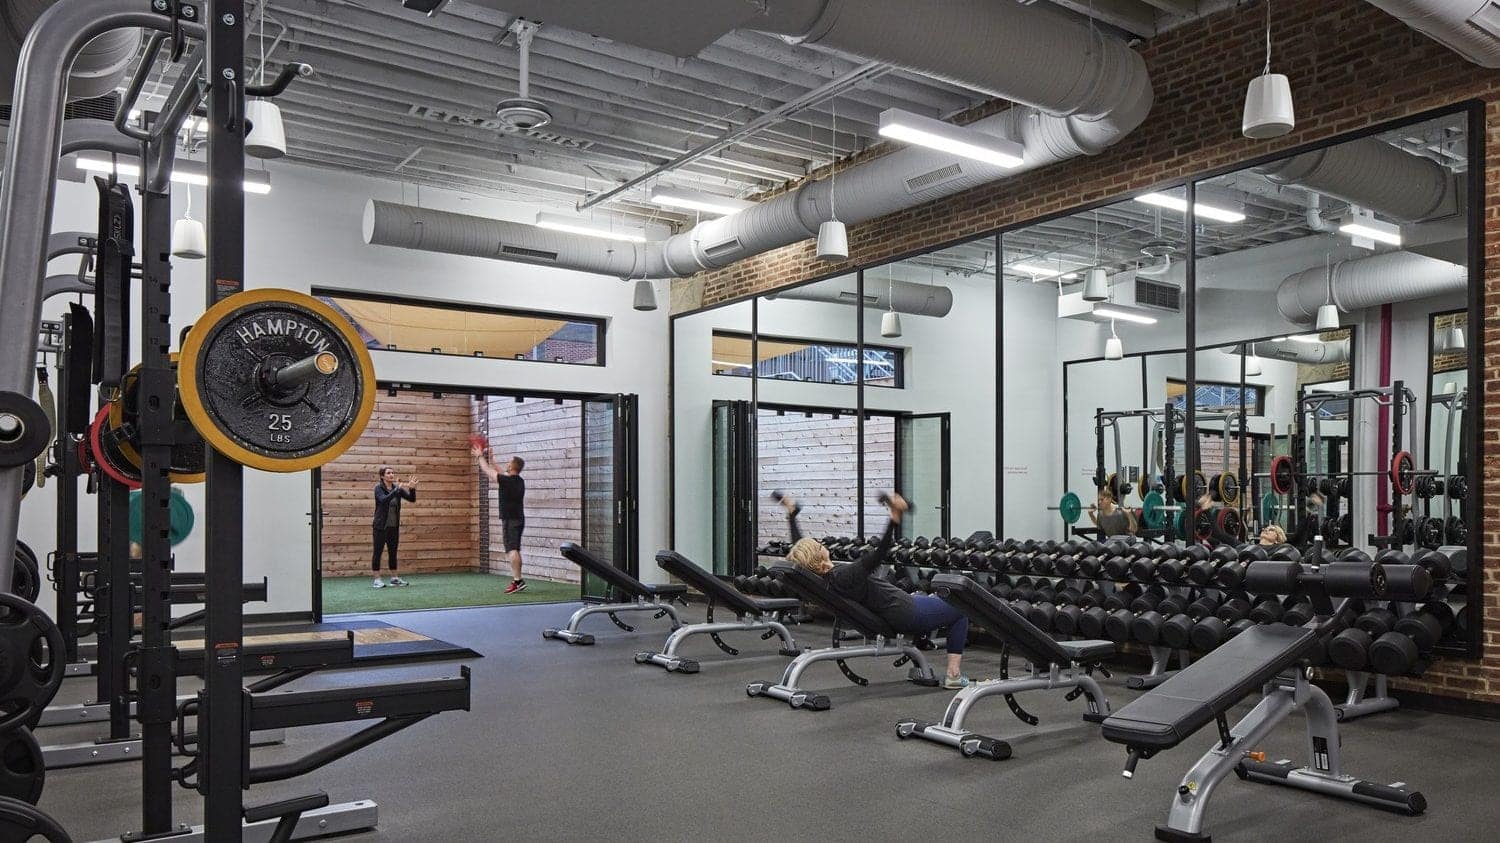 The gym area at Wel at Humana, Louisville, KY